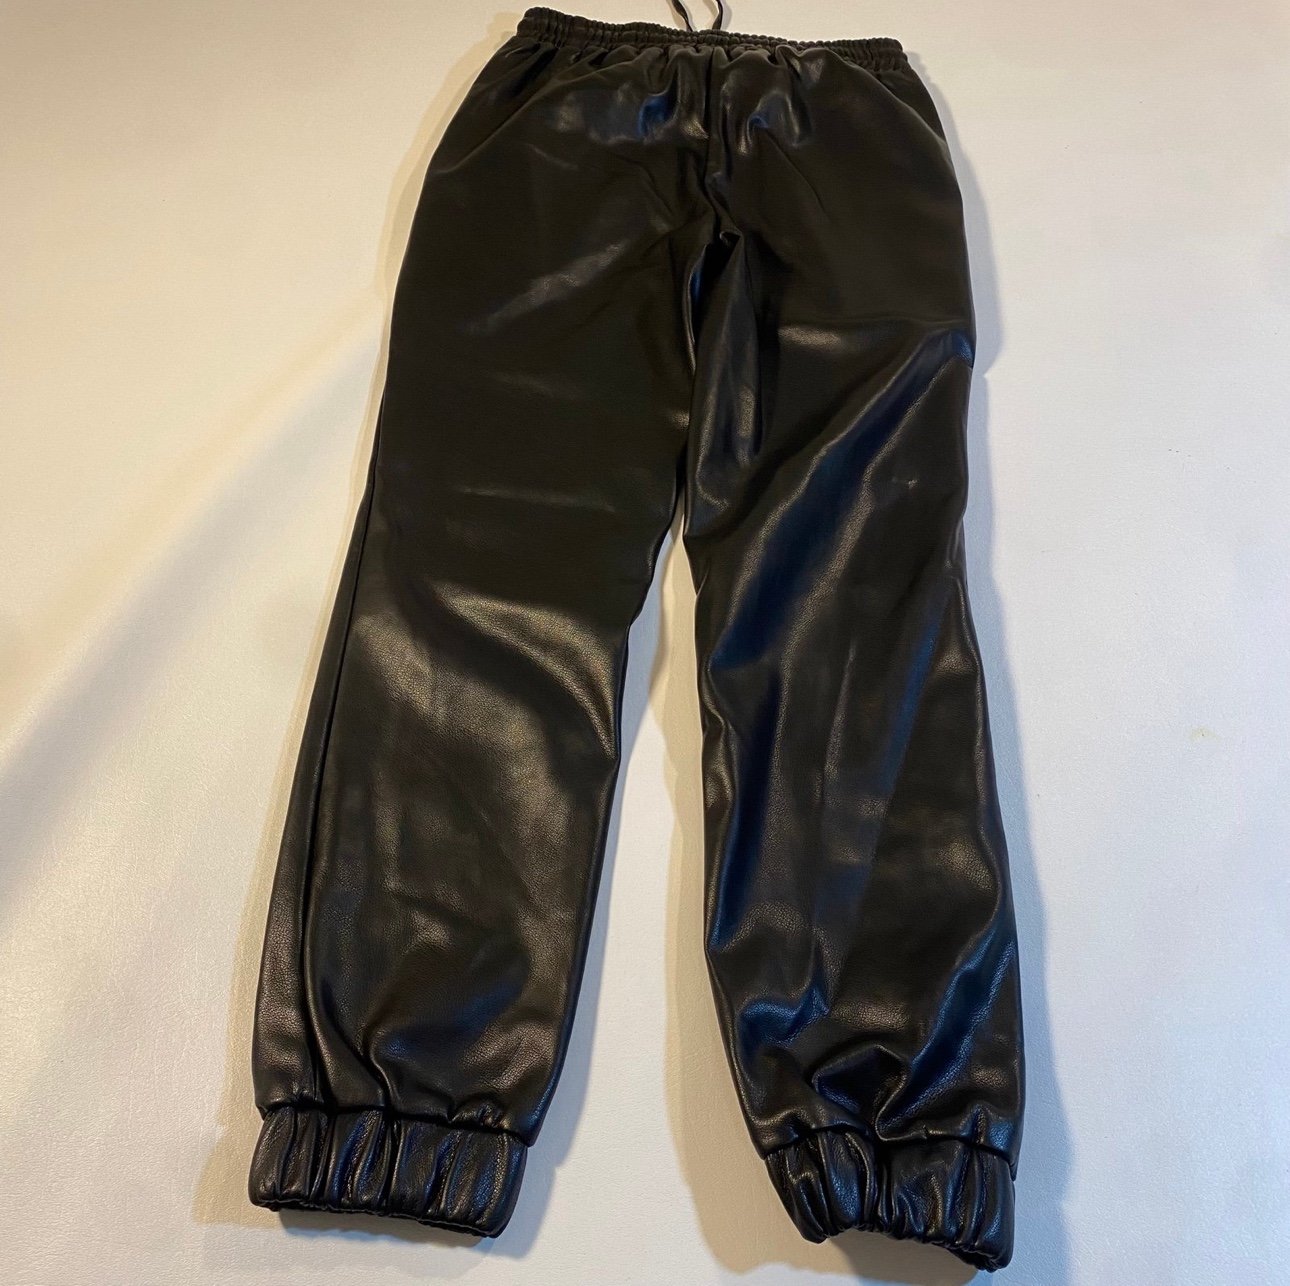 Custom NWT $90 Bishop + Young Size XS Black Iconic Vegan Leather Jogger l9fbvdaMn on sale